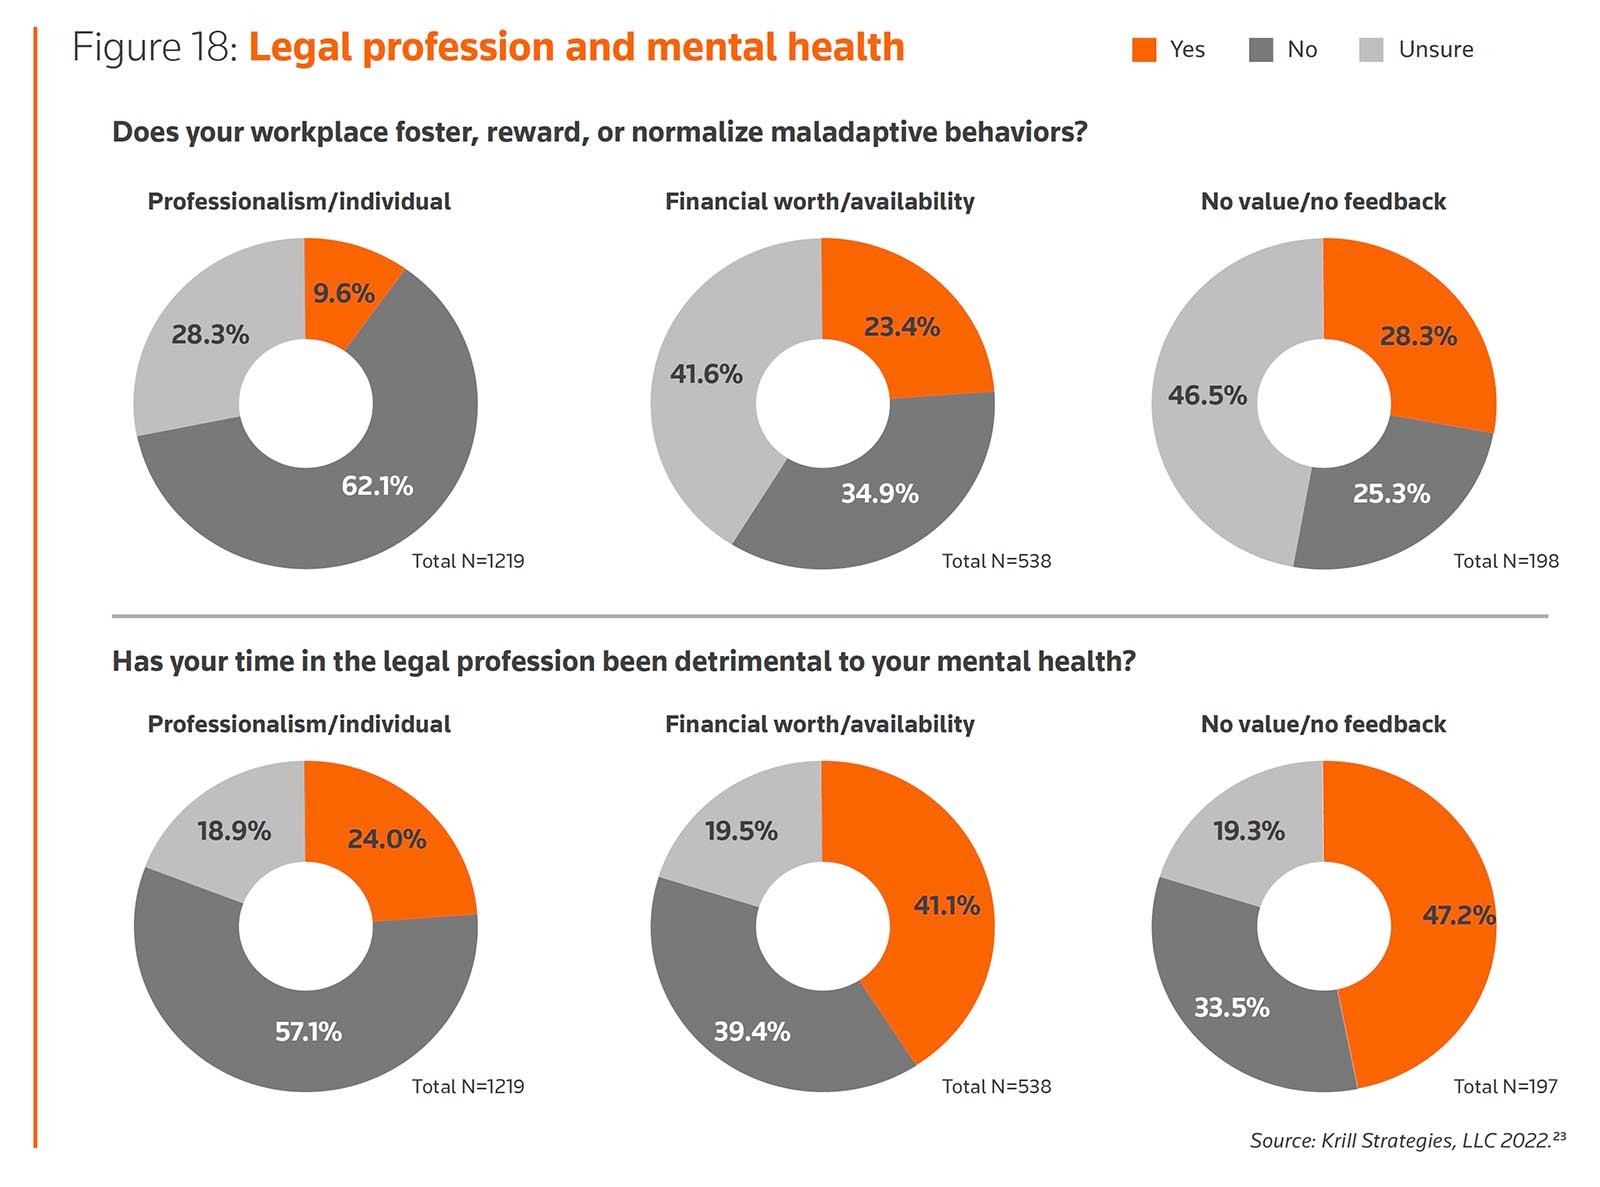 Legal profession and mental health